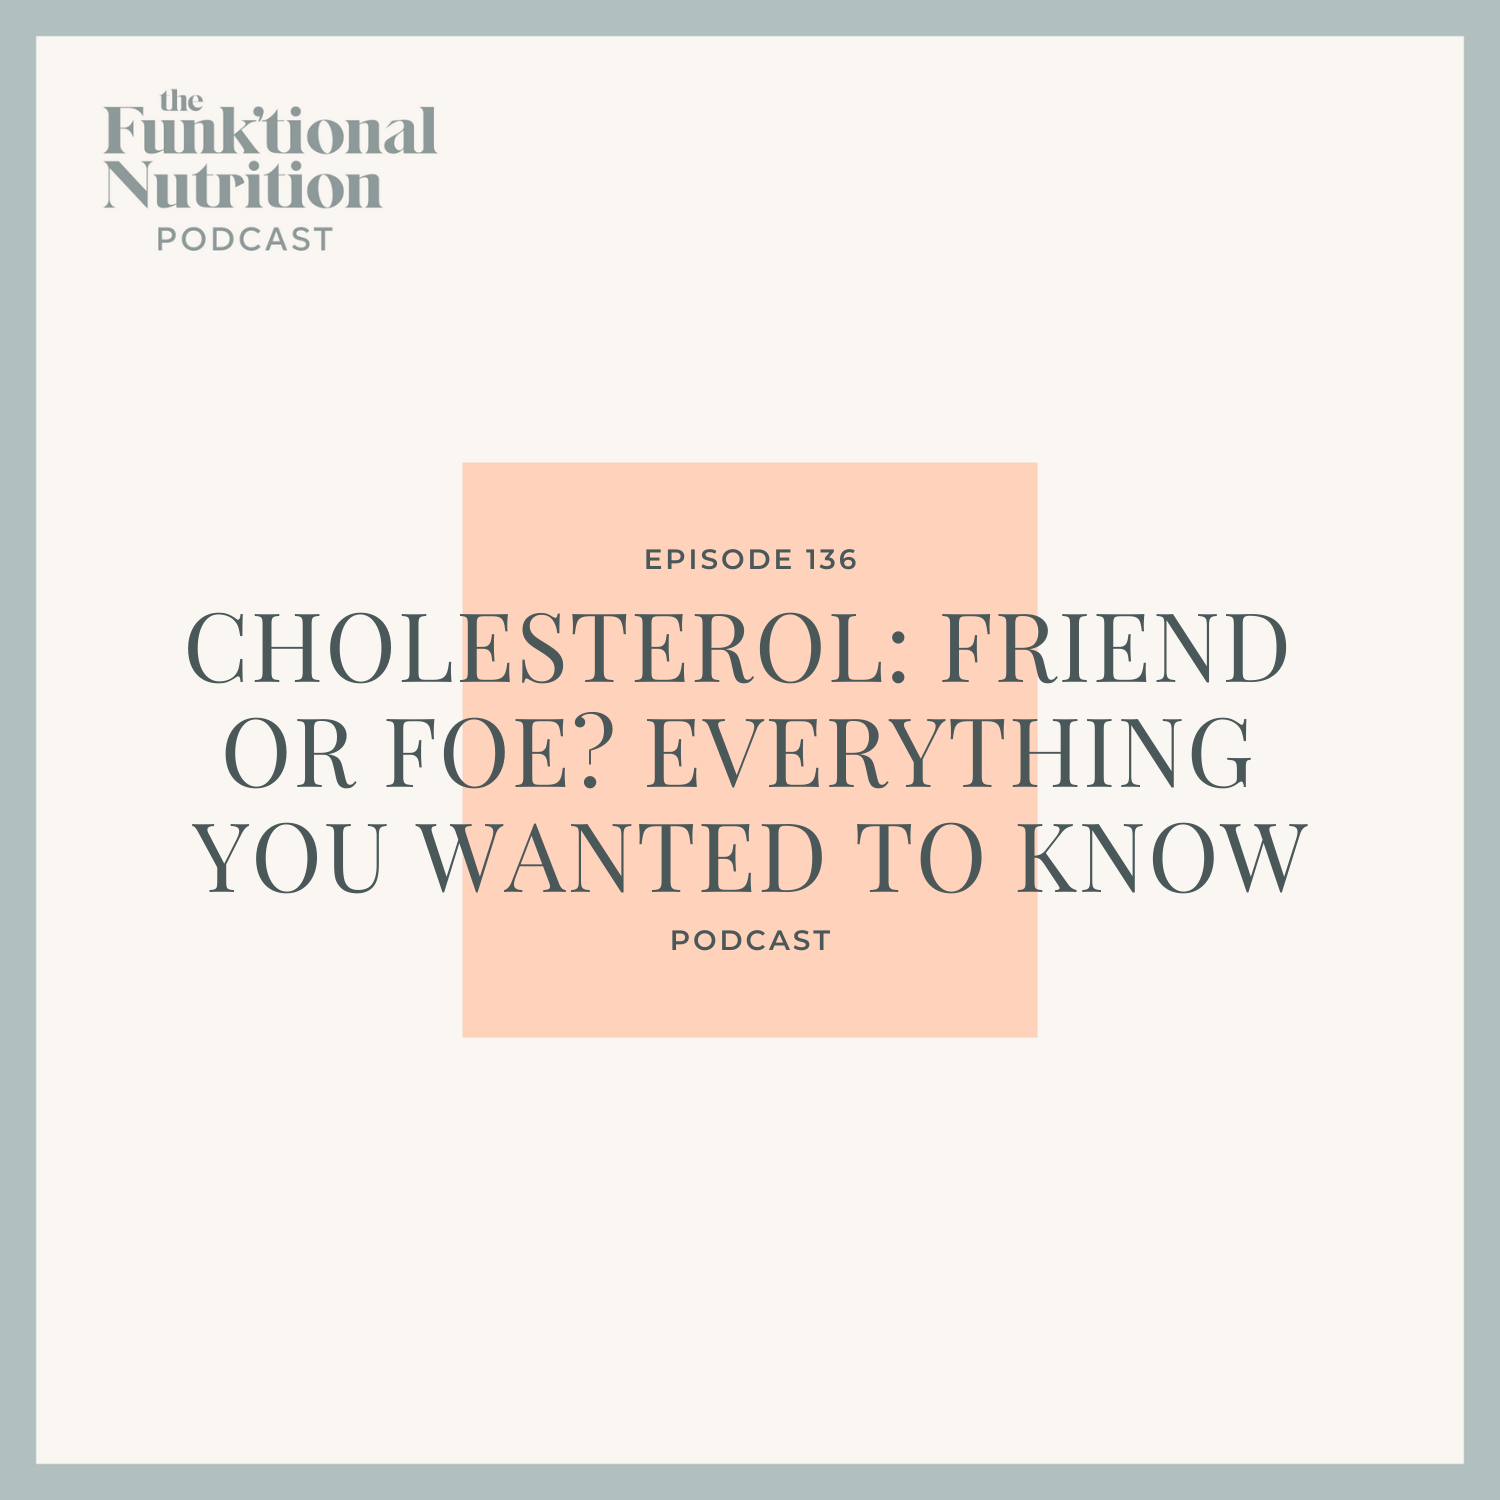 Episode-136-Cholesterol-Friend-or-Foe-Everything-You-Wanted-to-Know-The-Funk_ti.png